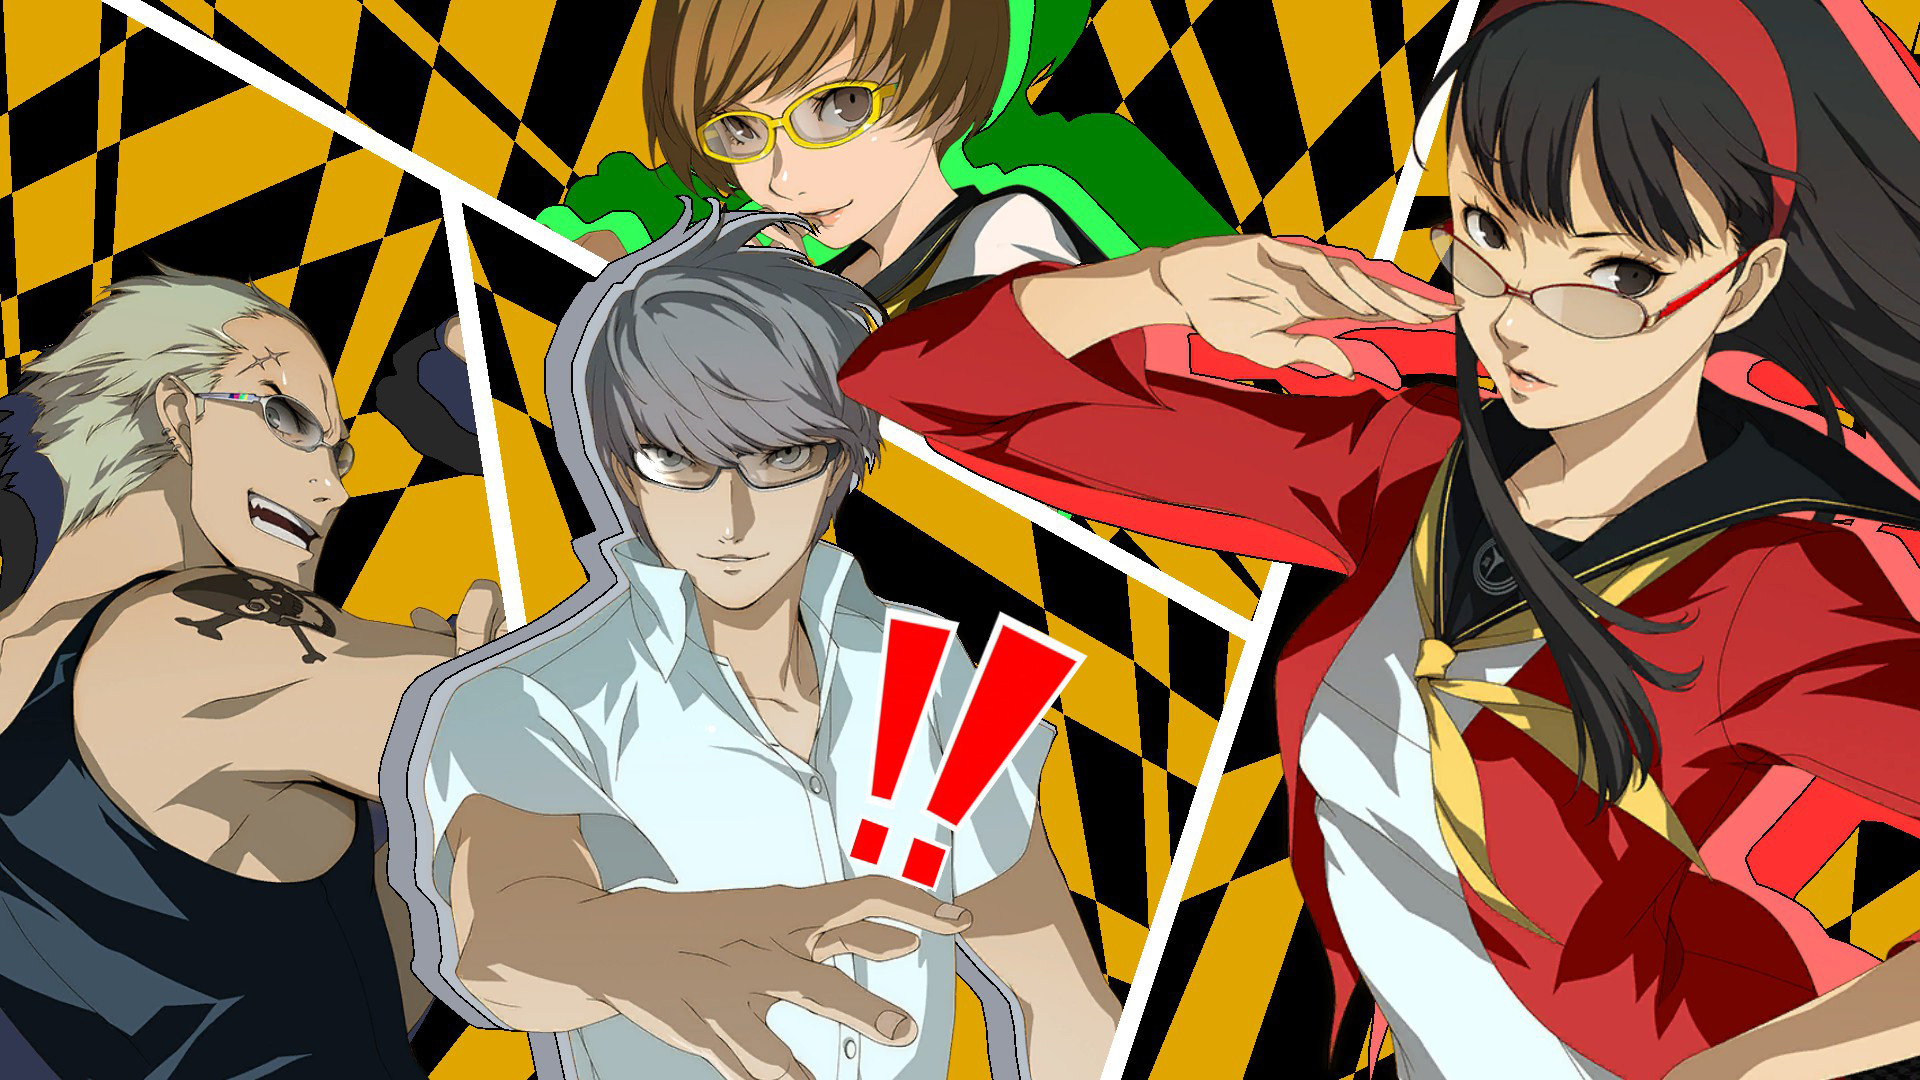 Persona 4 Golden is Out Now on PC